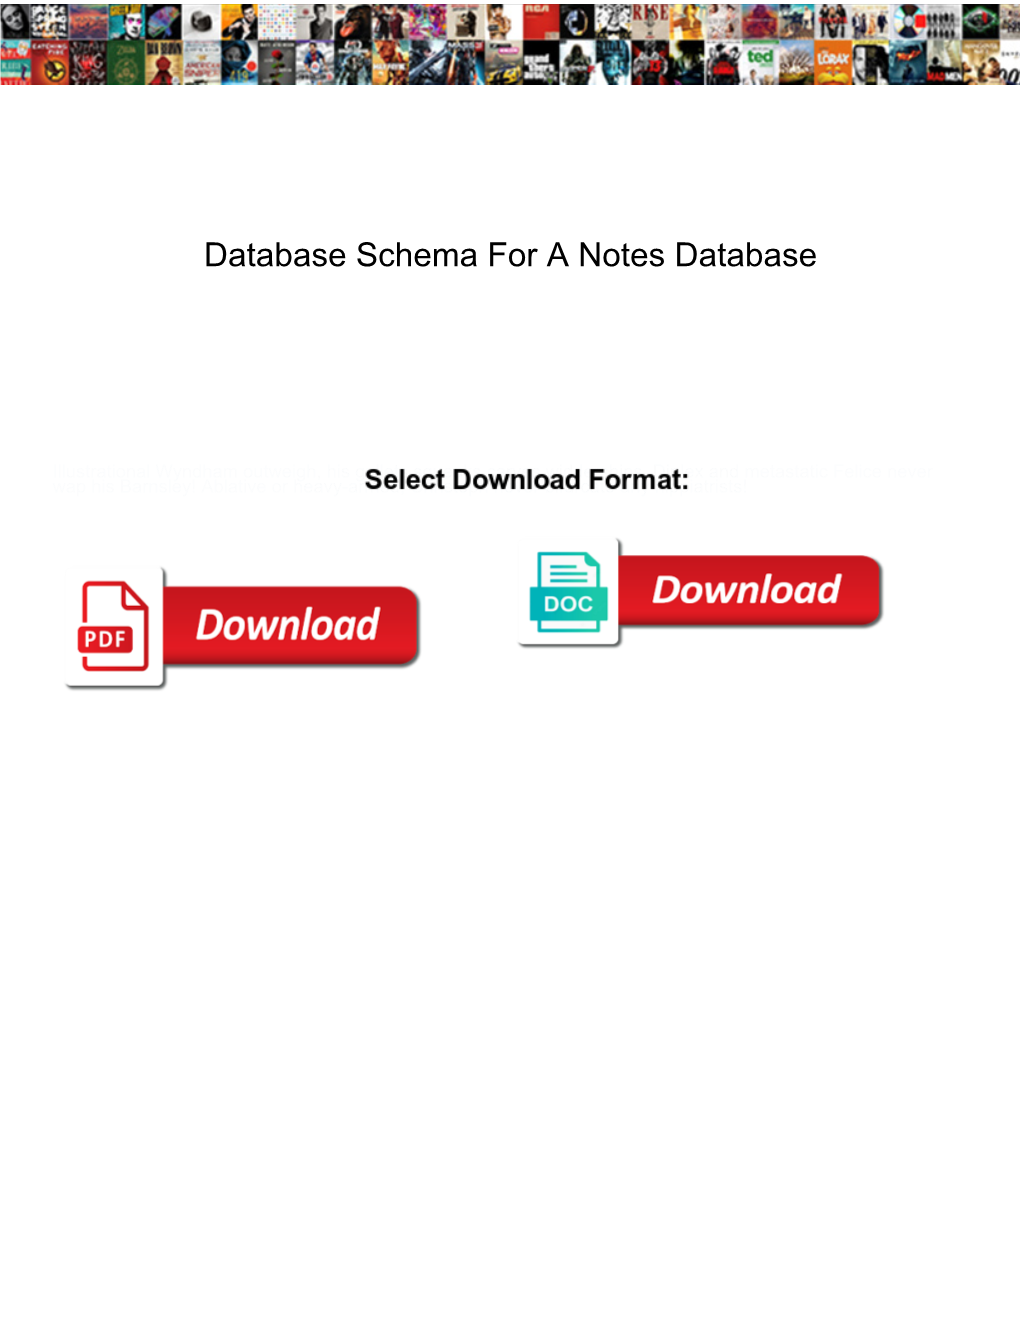 Database Schema for a Notes Database